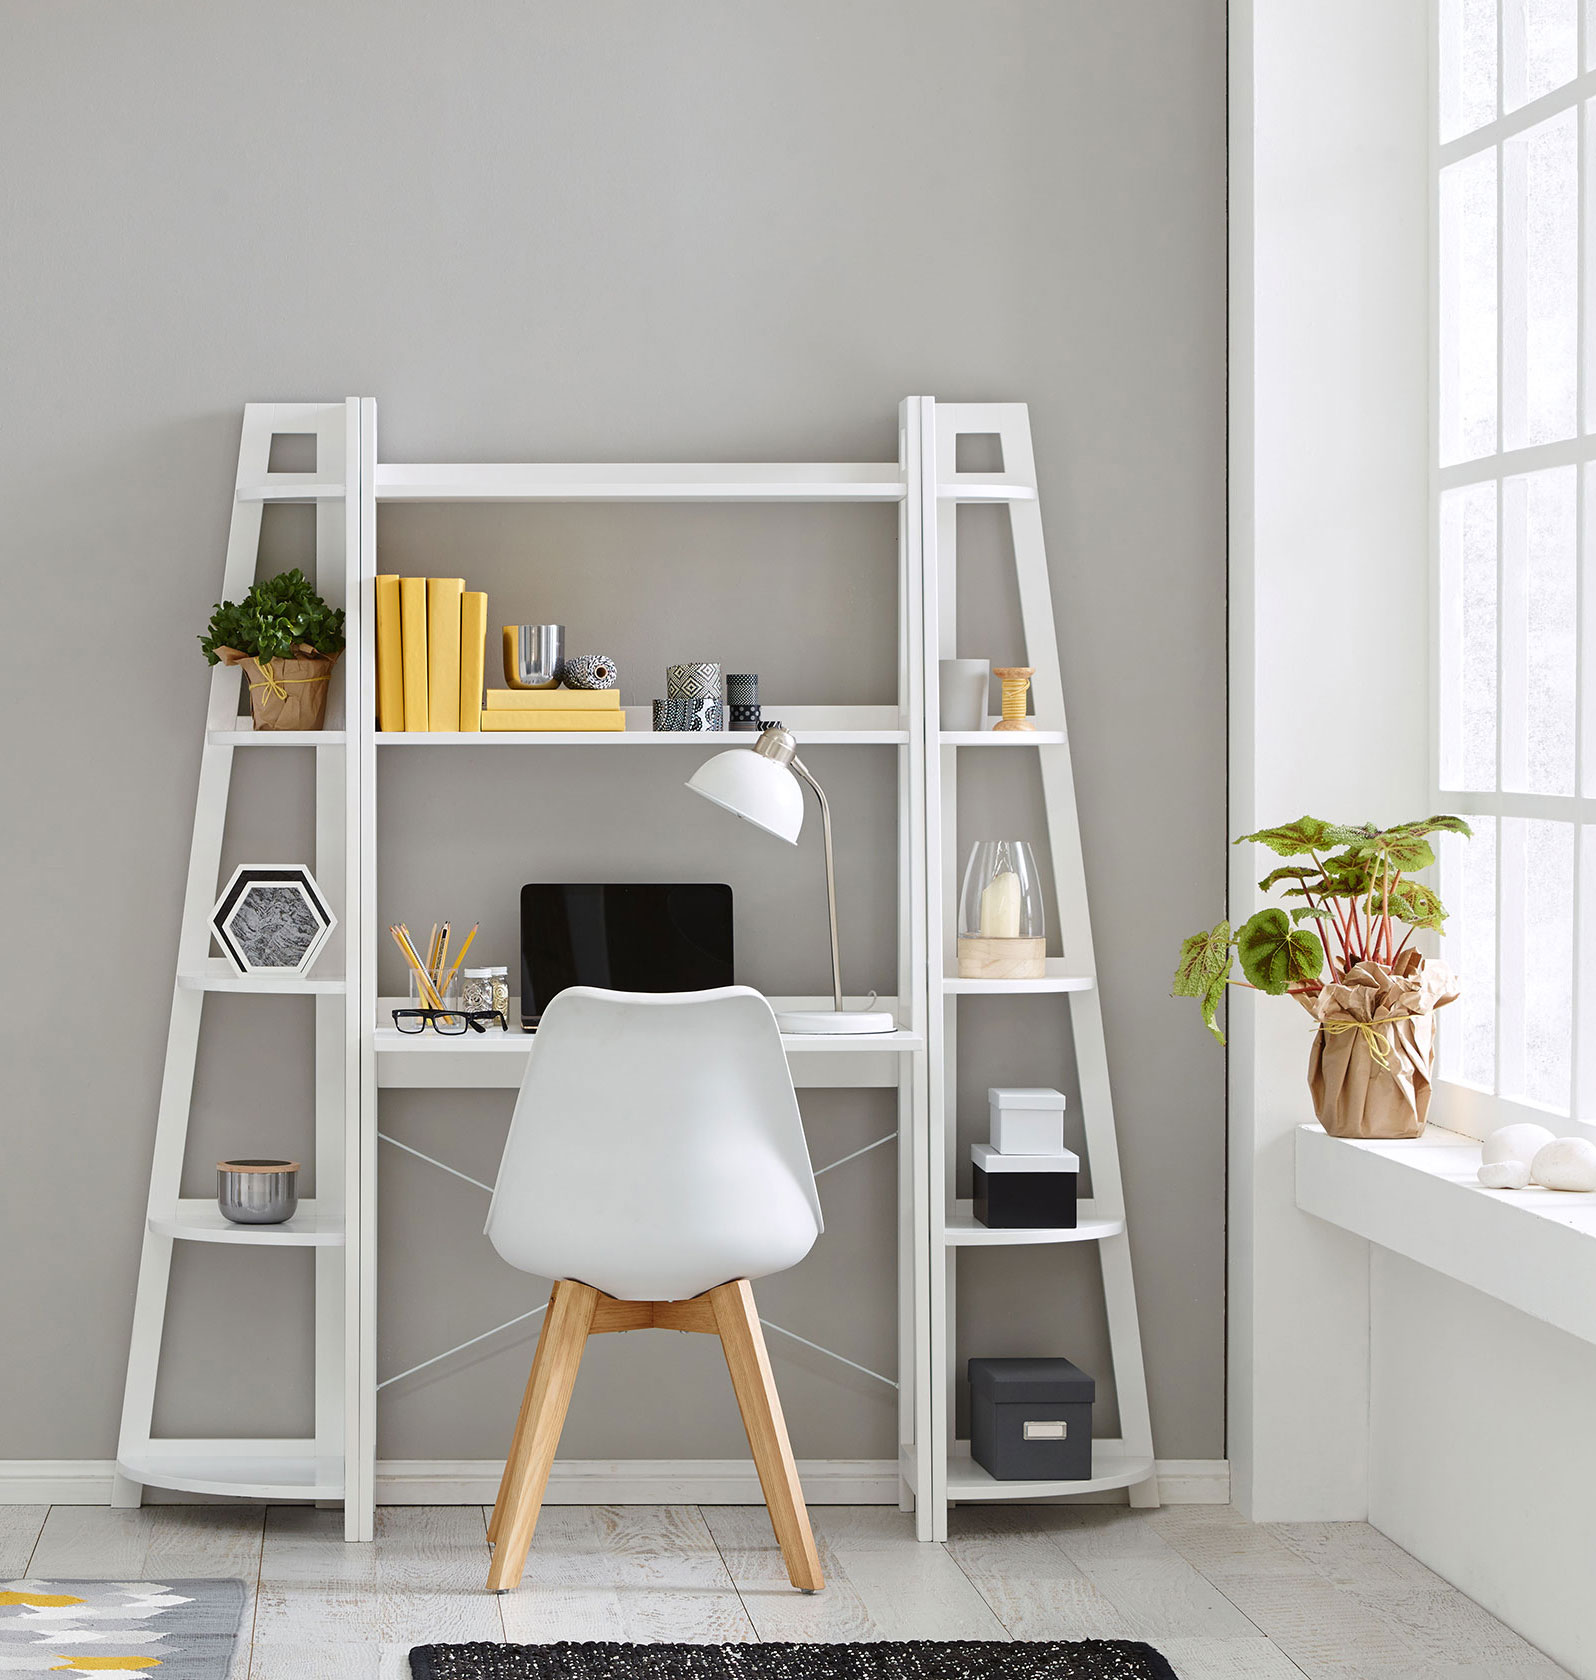 Domayne's Home Office Solutions: Let's Work The Room - Domayne Style Insider